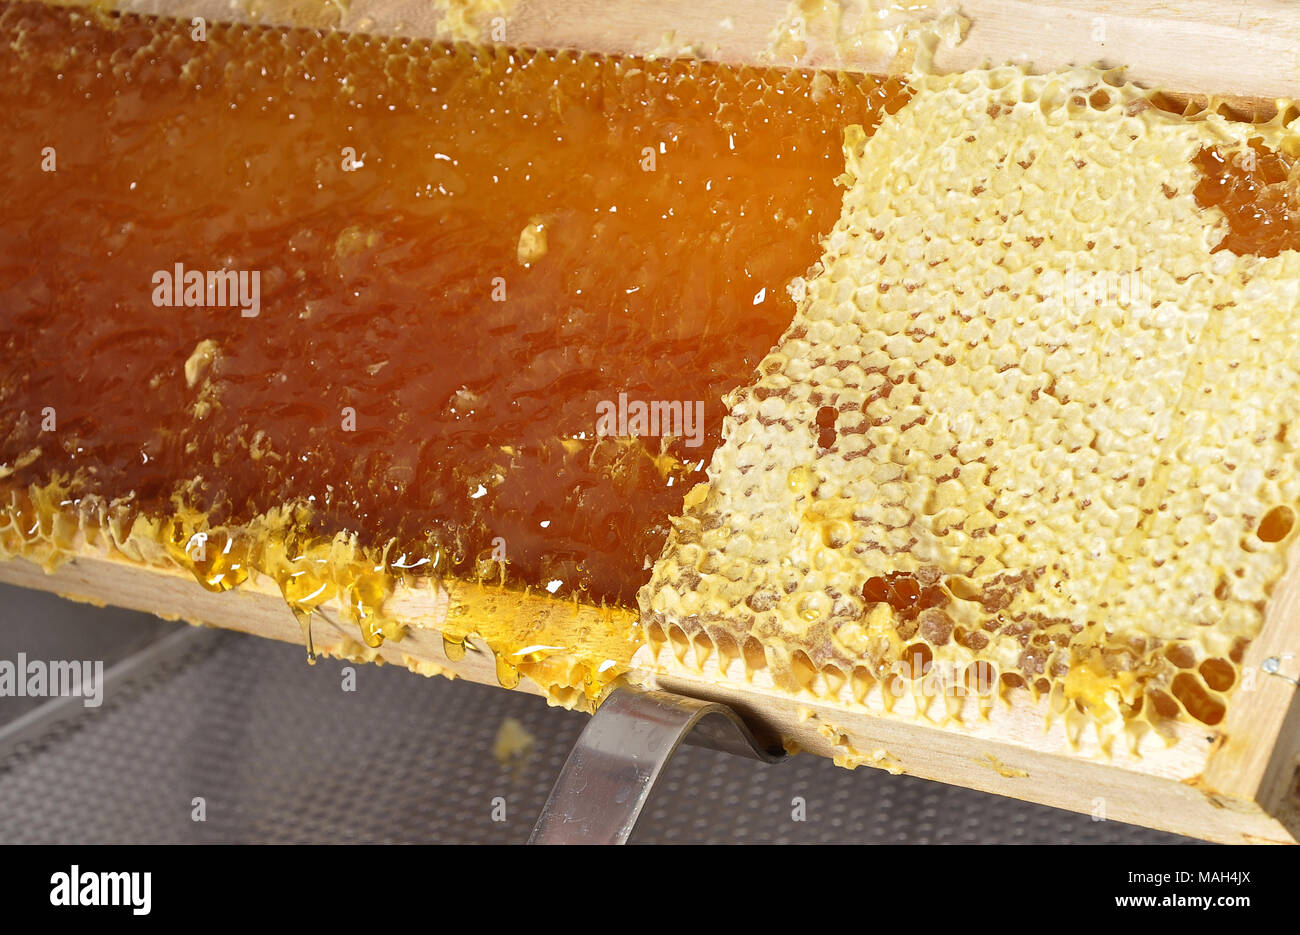 Uncapped and capped honeycomb Stock Photo